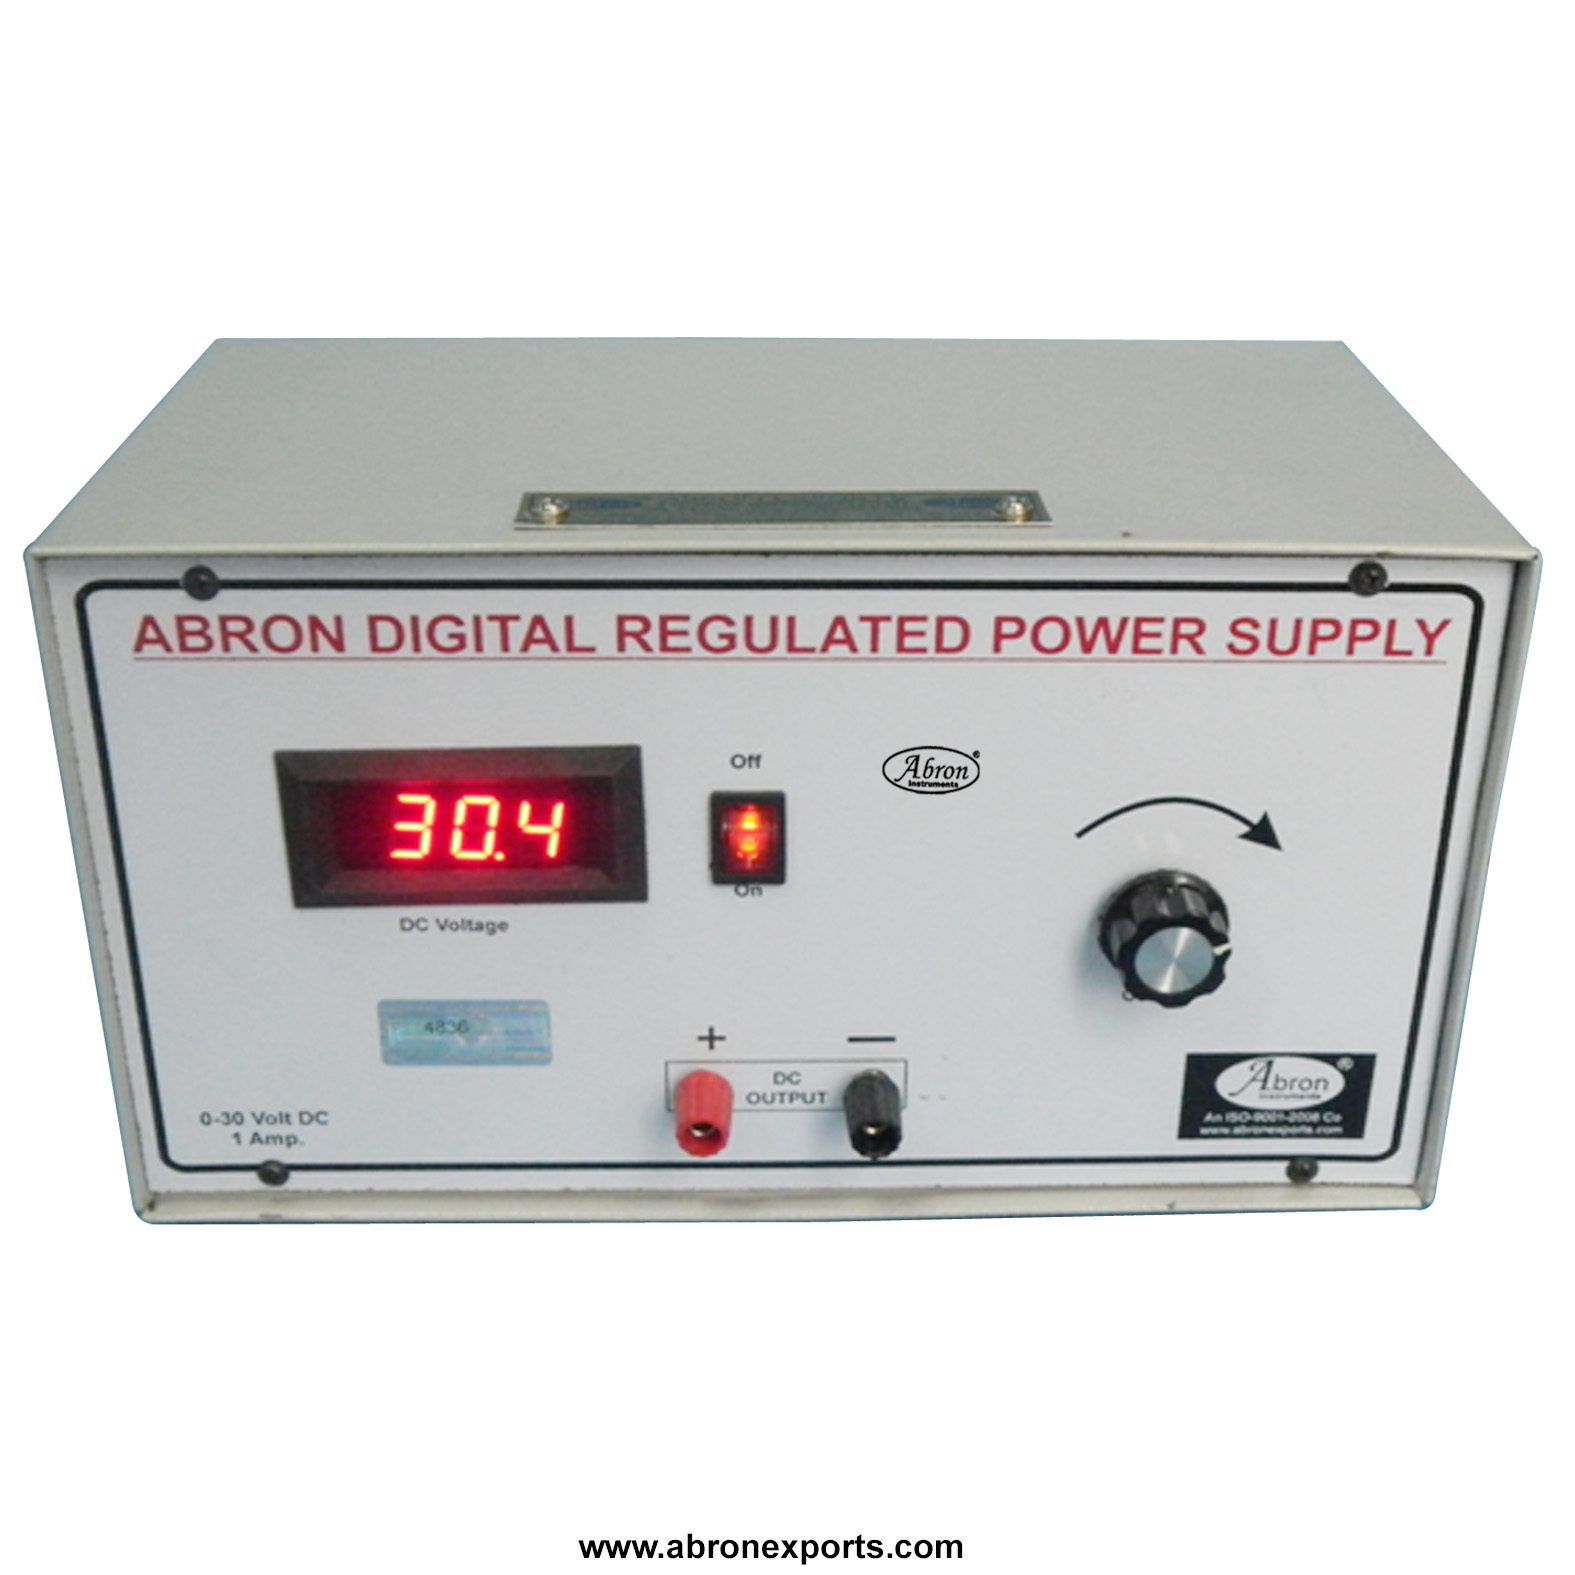 Power supply digital AC DC 0 30v variable x 0 1amp both variable stablized with 1meters output terminals Abron  AE-1377N  AE-1377A